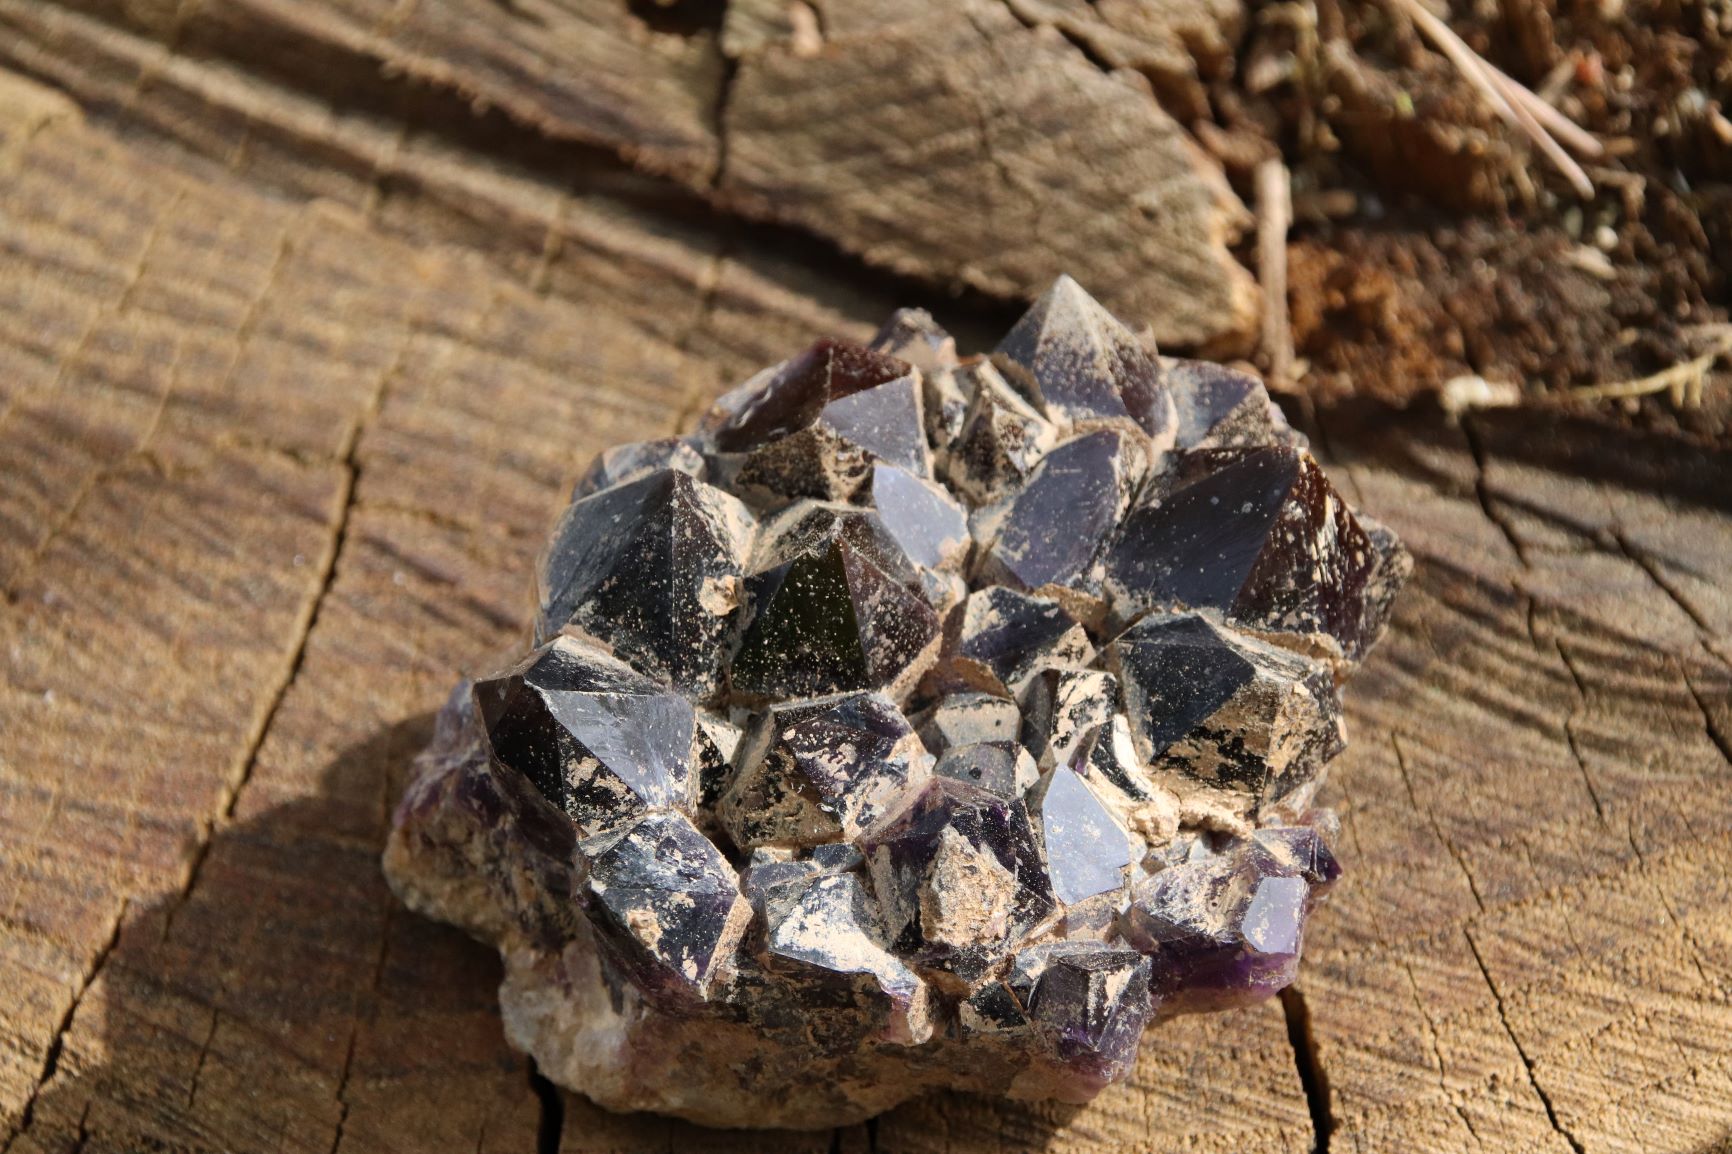 Piece of crystallized amethyst on a raw wooden plate.